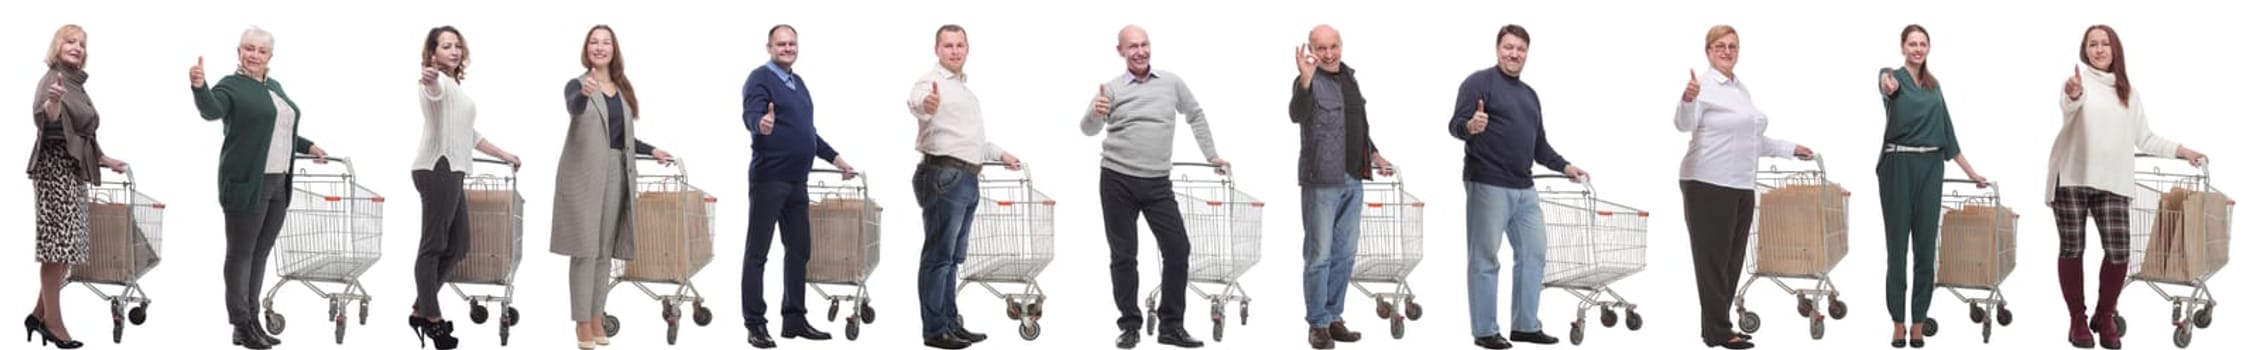 group of people with cart showing thumbs up isolated on white background